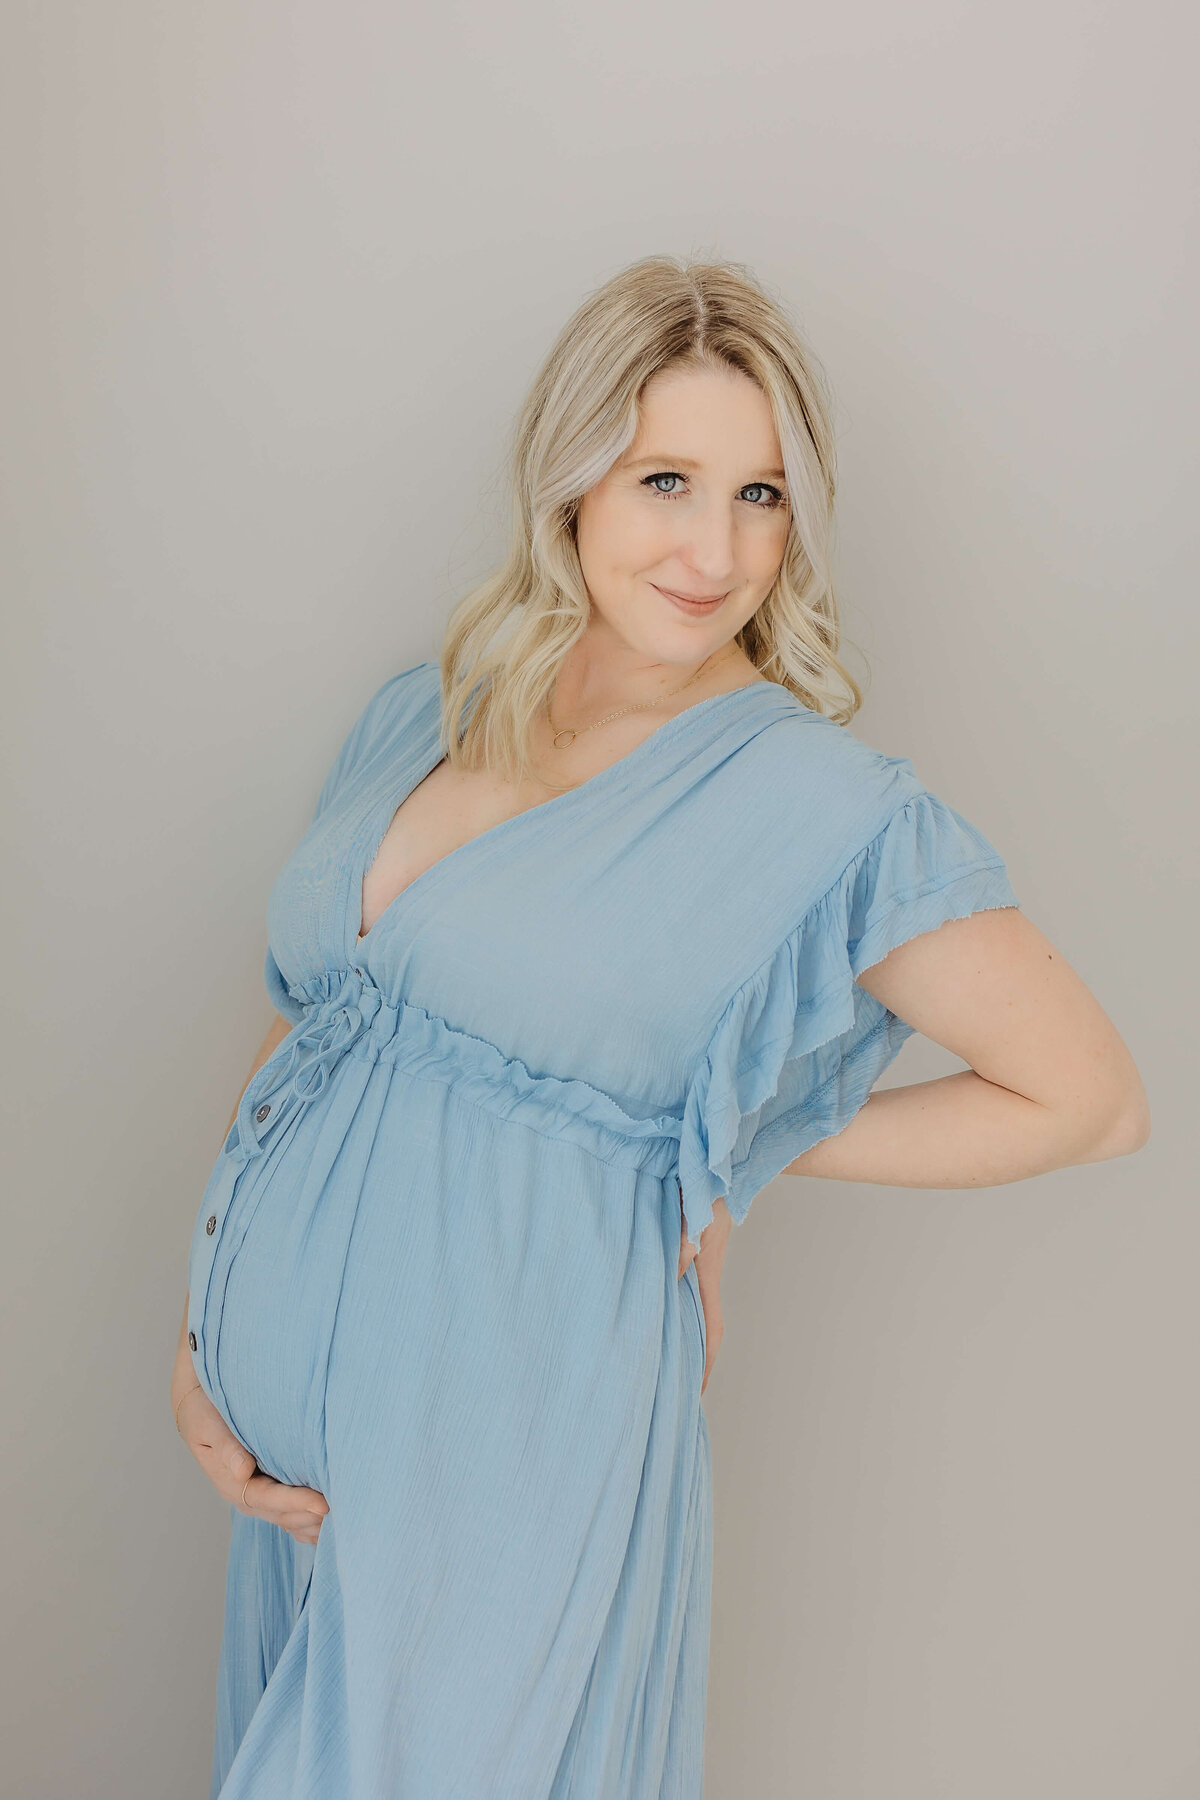 Pregnant mom in blue dress standing up and smiling at camera